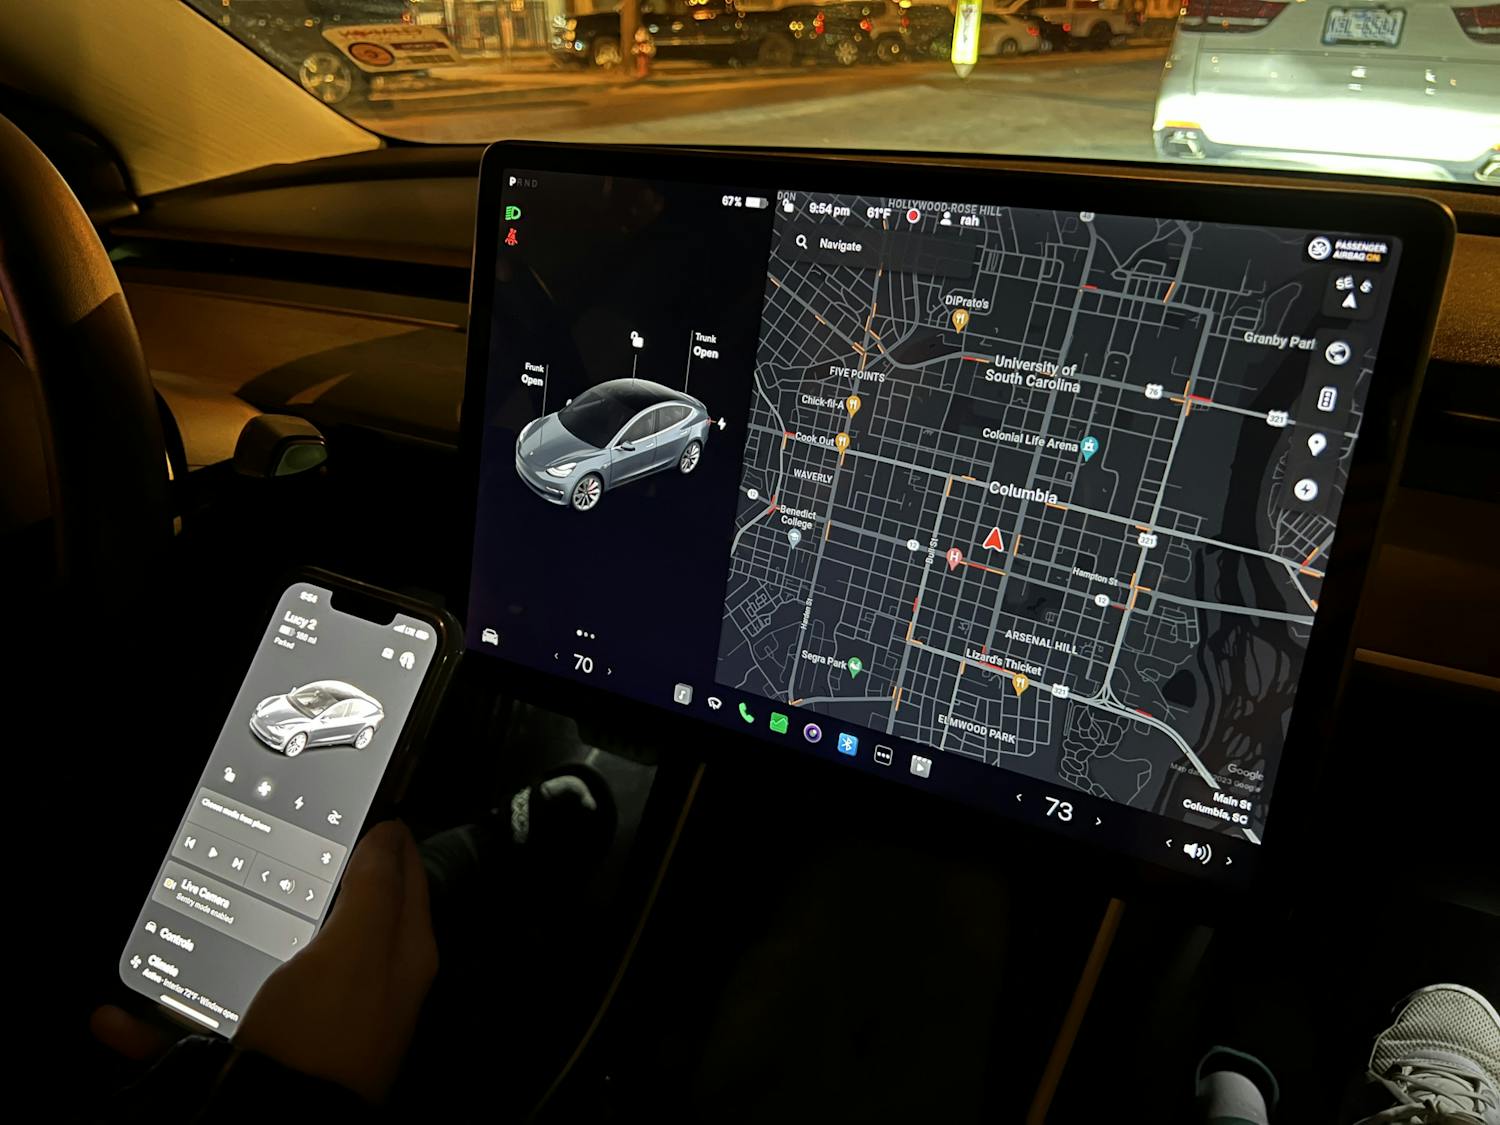 Columbia resident Laura Streit uses the Tesla app in her Tesla Model 3 to find a nearby charging station on Feb. 8, 2023. A Tesla's built-in touch screen offers an easy-to-use navigation system to help drivers locate supercharger stations and other necessities.&nbsp;